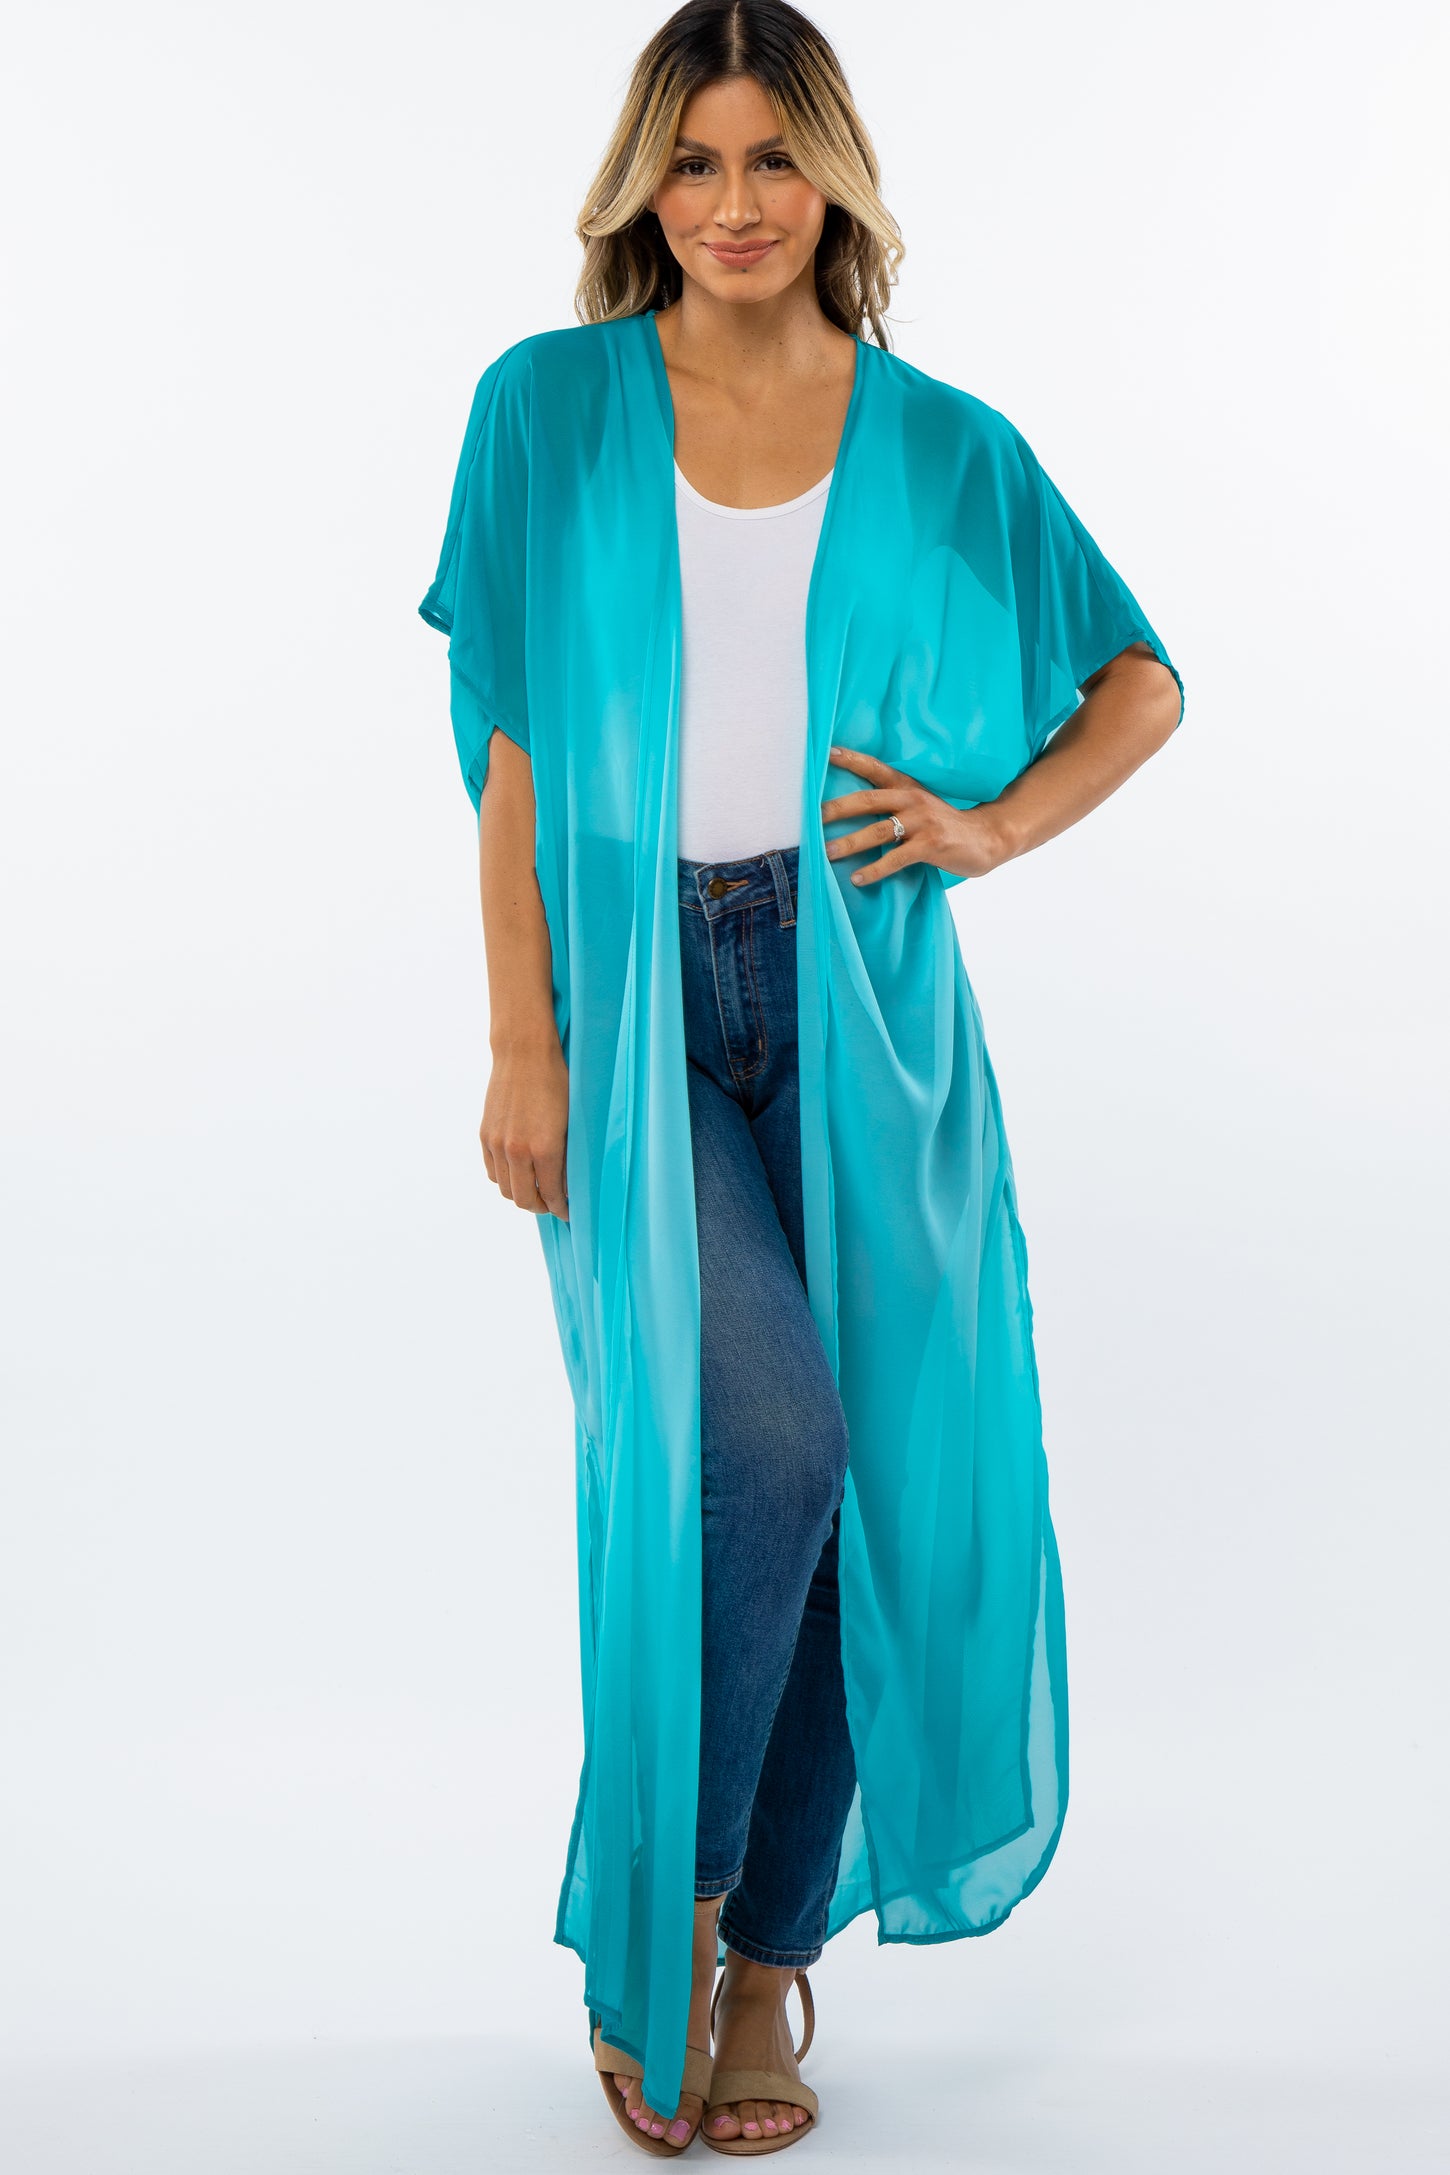 Teal Ombre Chiffon Long Maternity Cover Up